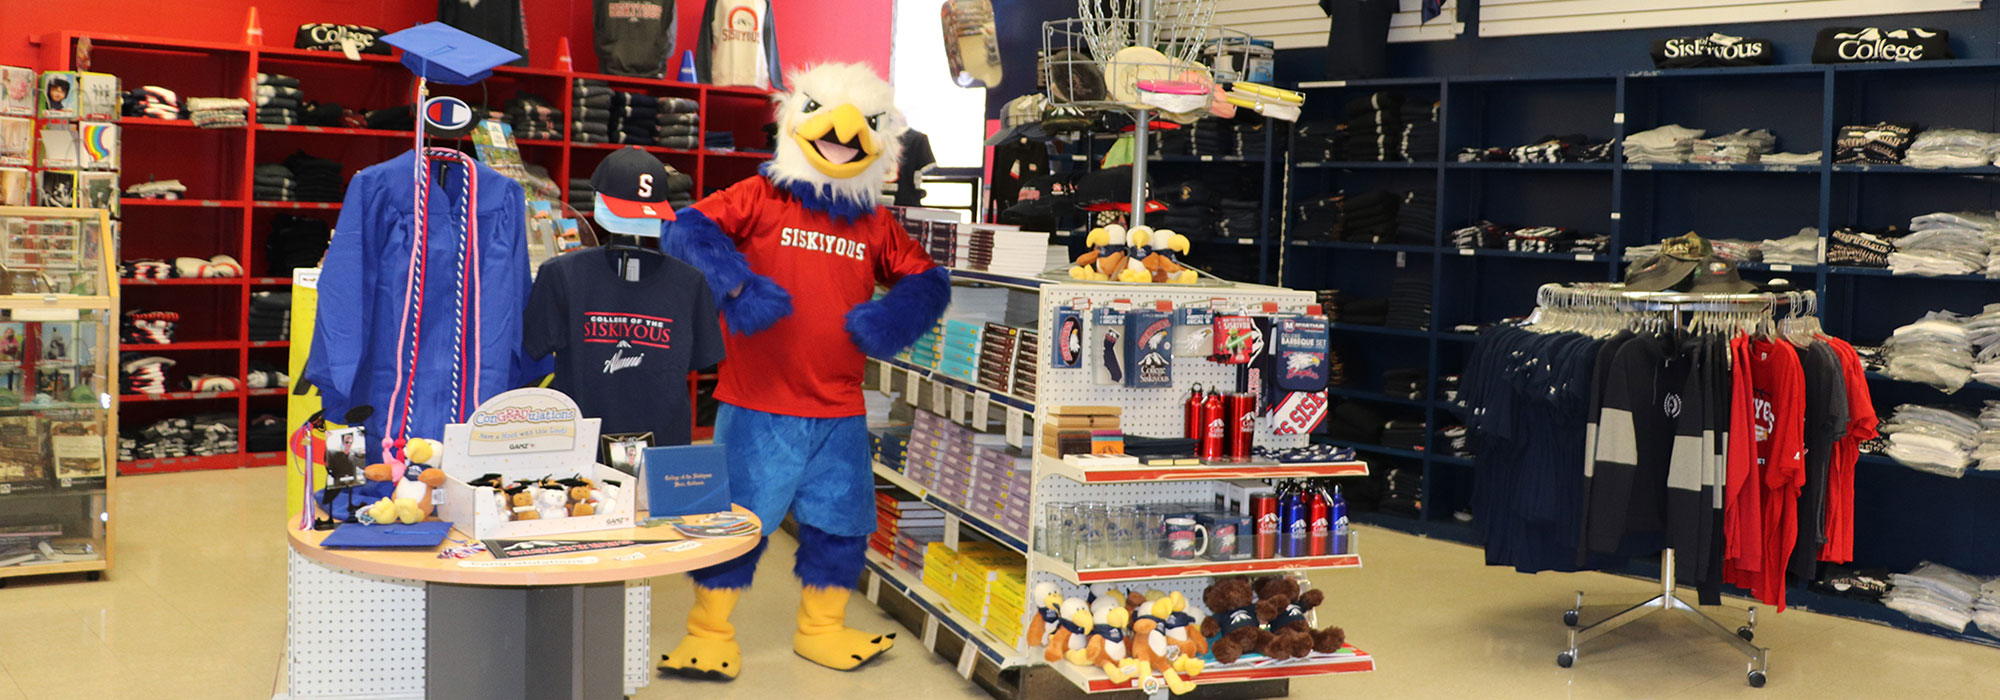 Inside Bookstore with Eddie the Eagle